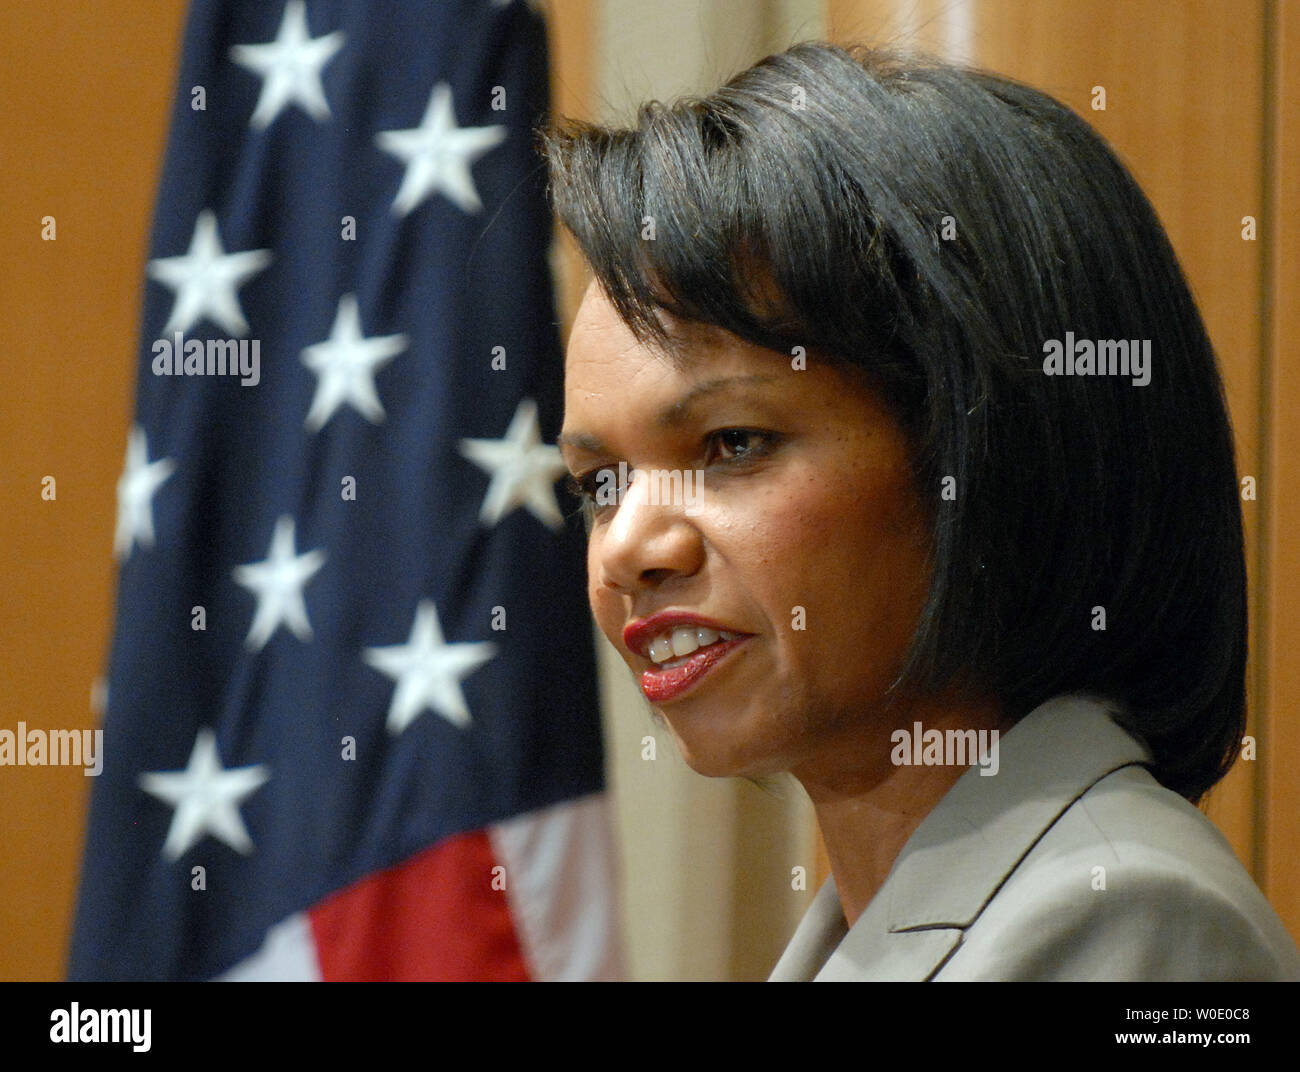 Secretary of State Condoleezza Rice participates in a conference titled  'US-Soviet Relations in the Era of Detente, 1969-1976,' at the State Department in Washington on October 22, 2007.  (UPI Photo/Roger L. Wollenberg) Stock Photo